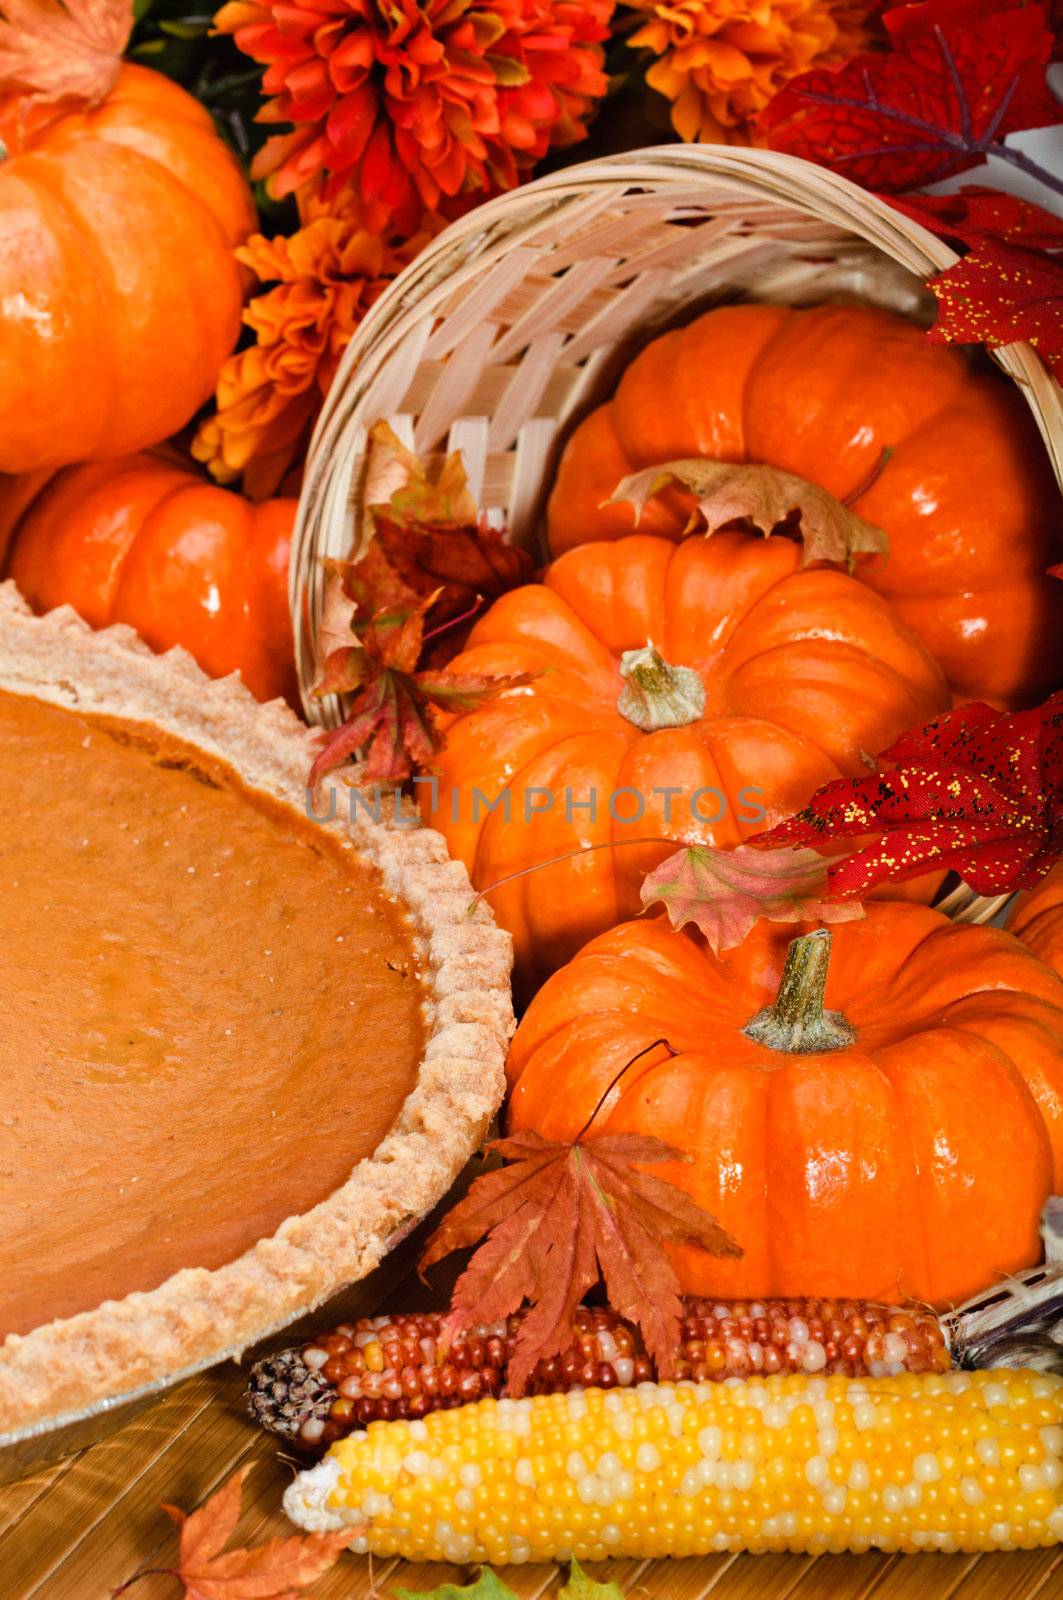 Pumpkin pie with autumn leaves and pumpkins. by lobzik